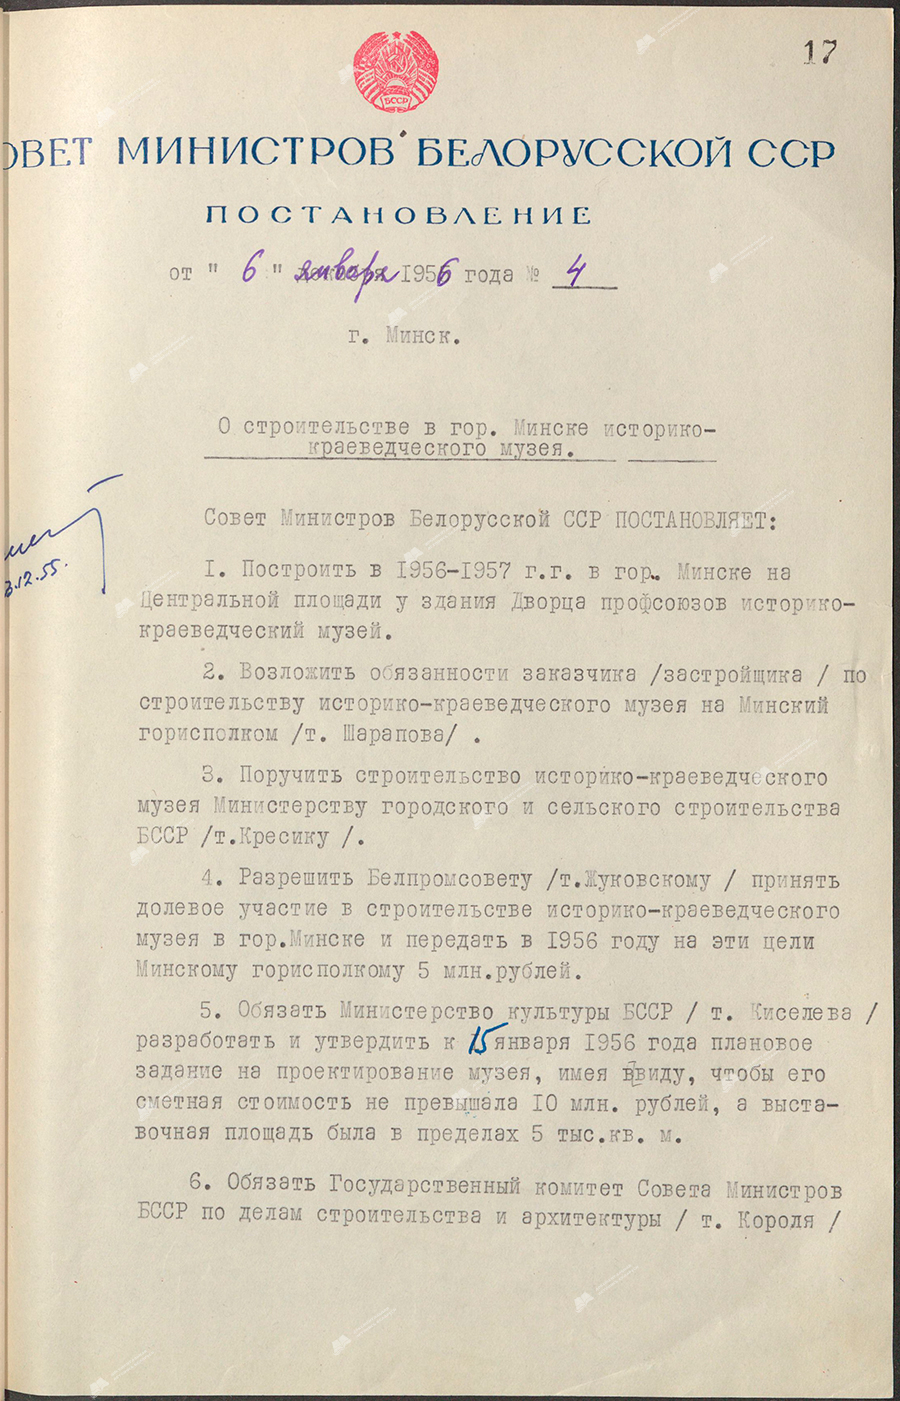 Resolution No. 4 of the Council of Ministers of the Byelorussian SSR «On construction in the city. Minsk Museum of History and Local Lore»-с. 0